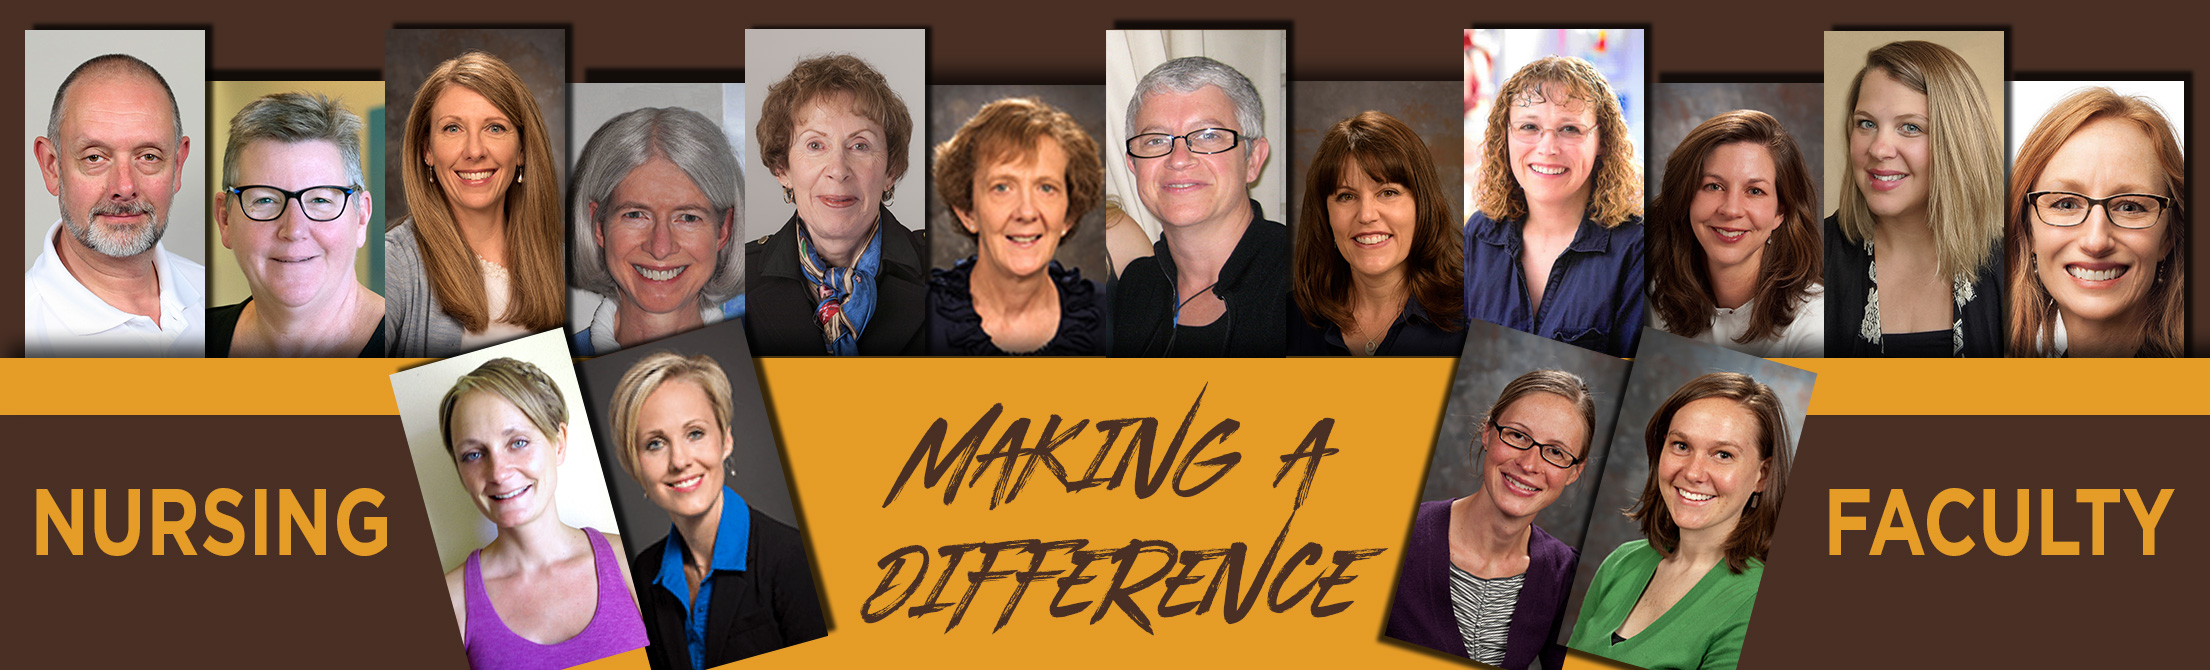 pictures of many smiling faculty members making a difference